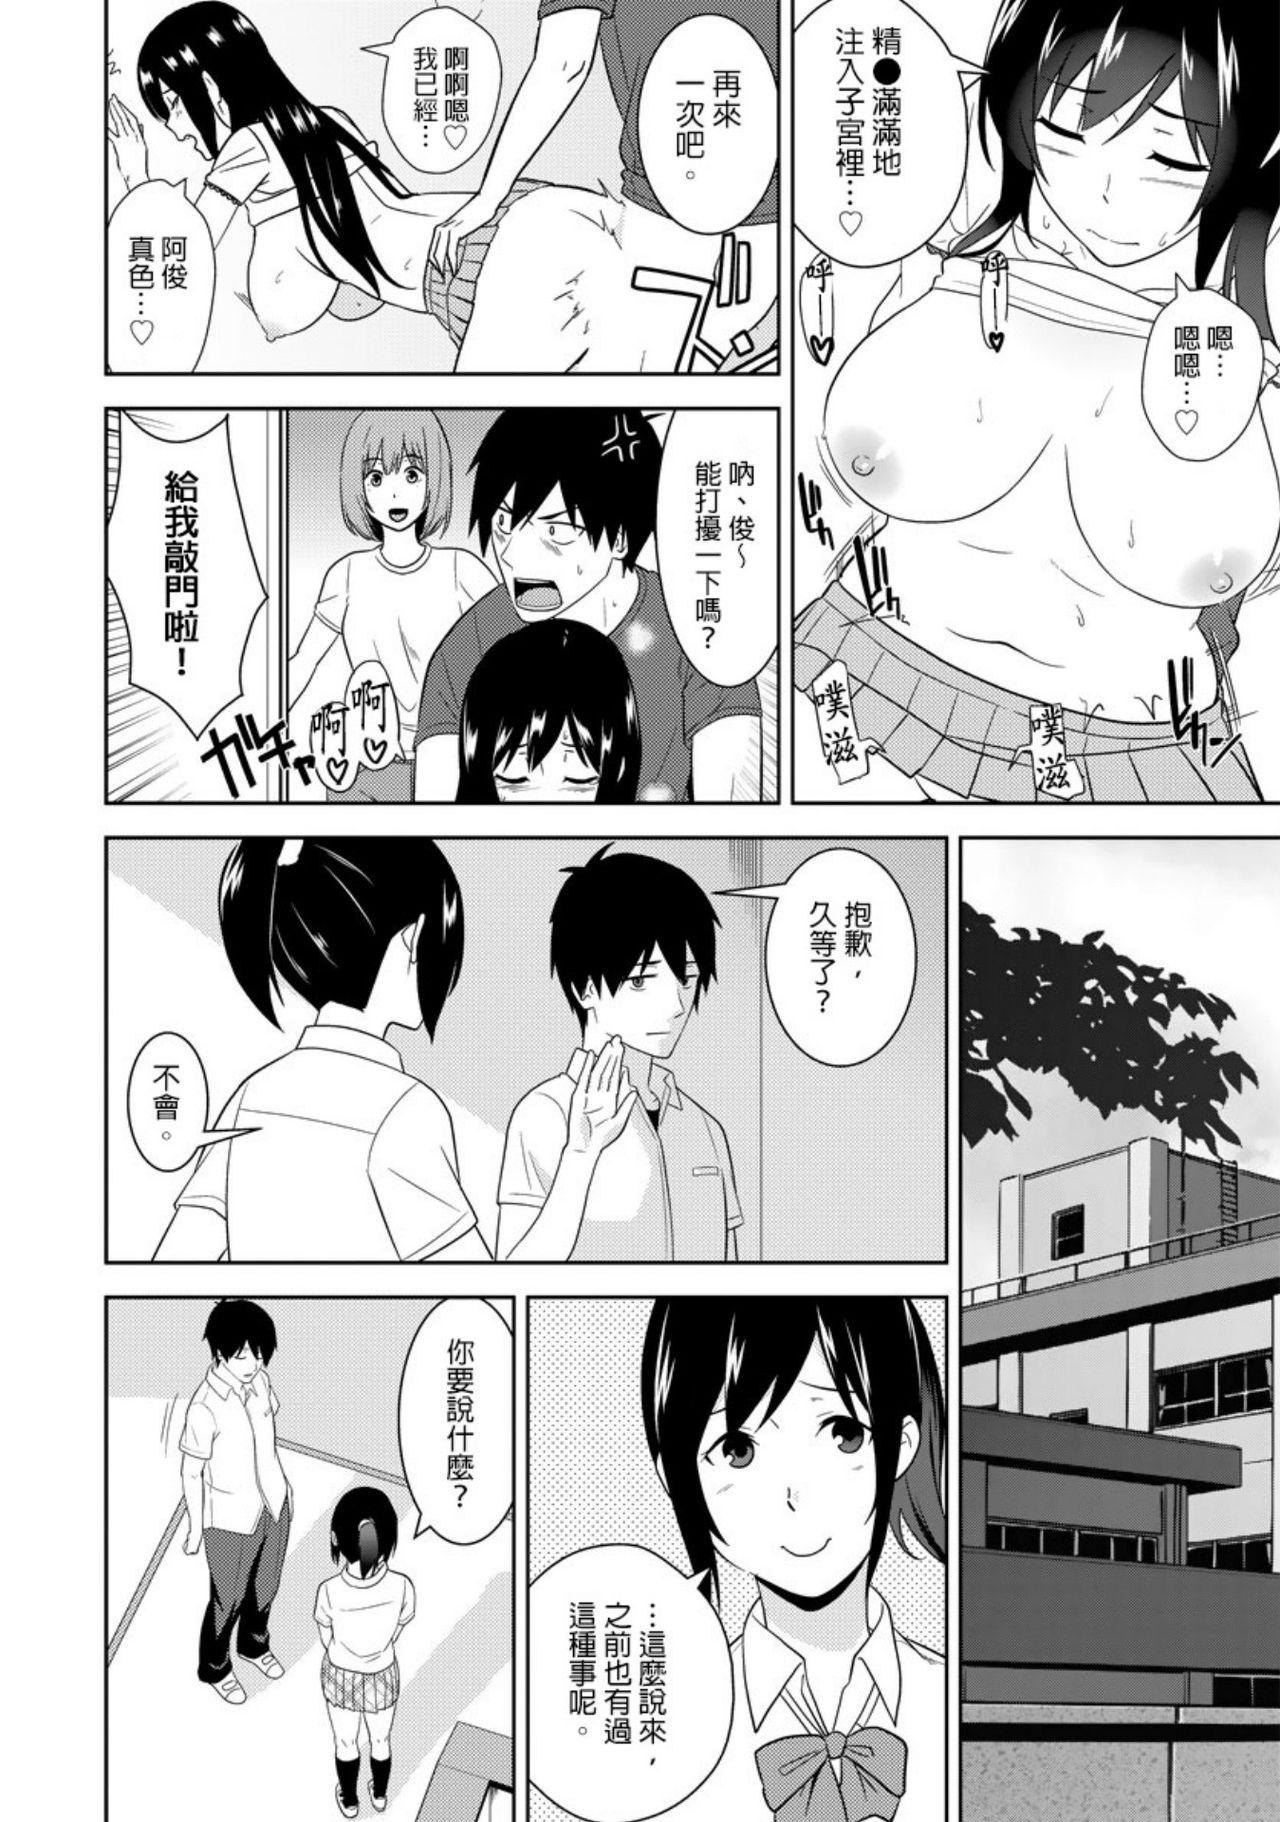 Twerking 教え子に襲ワレル人妻は抵抗できなくて Ch.10 Public Nudity - Page 9